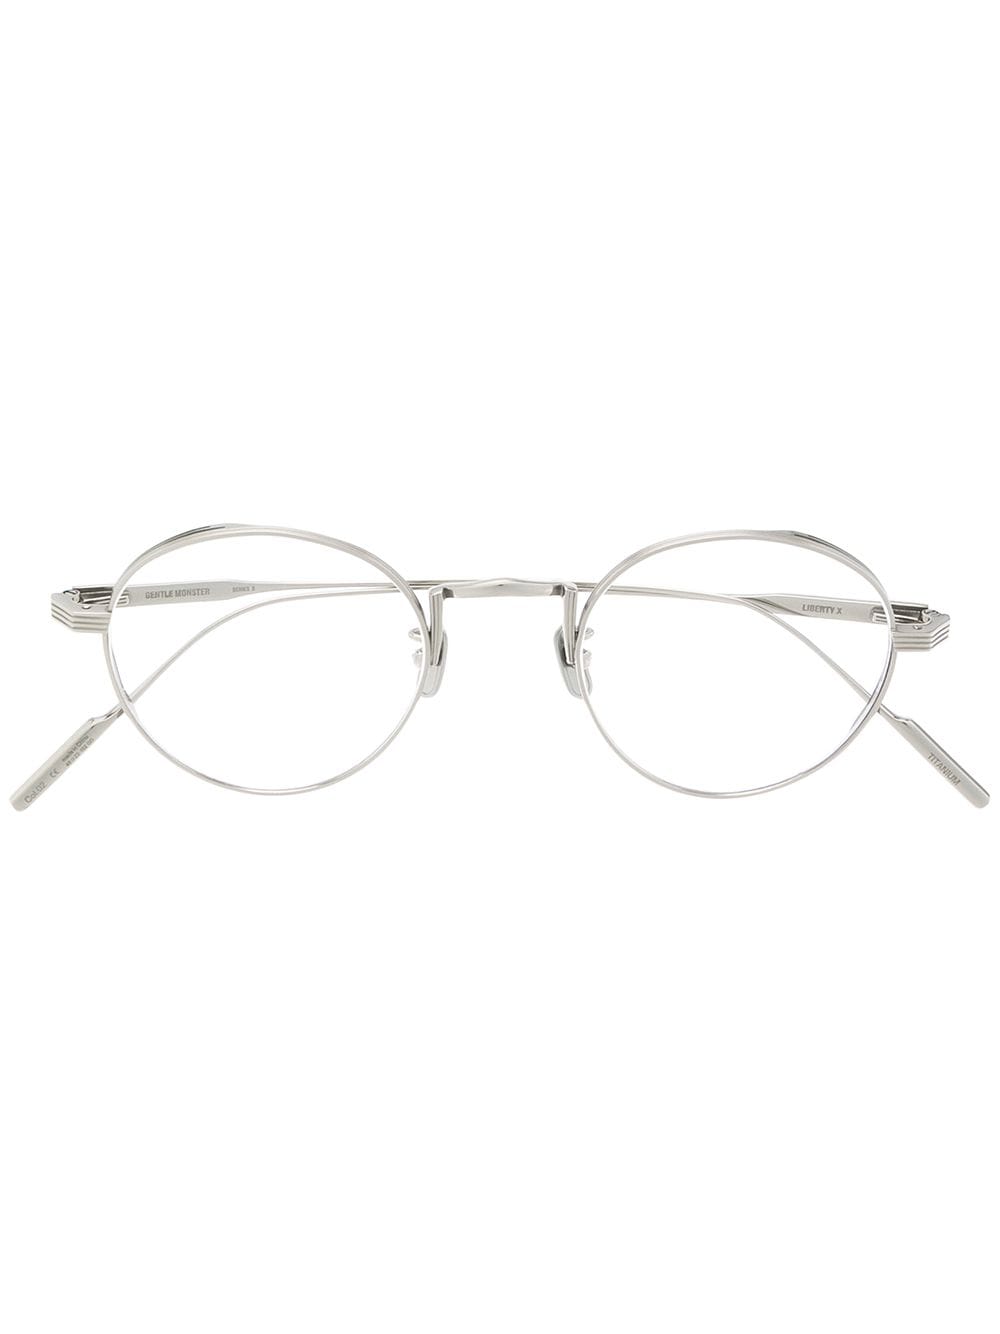 Gentle Monster Liberty X 02 Round Frame Glasses - Farfetch